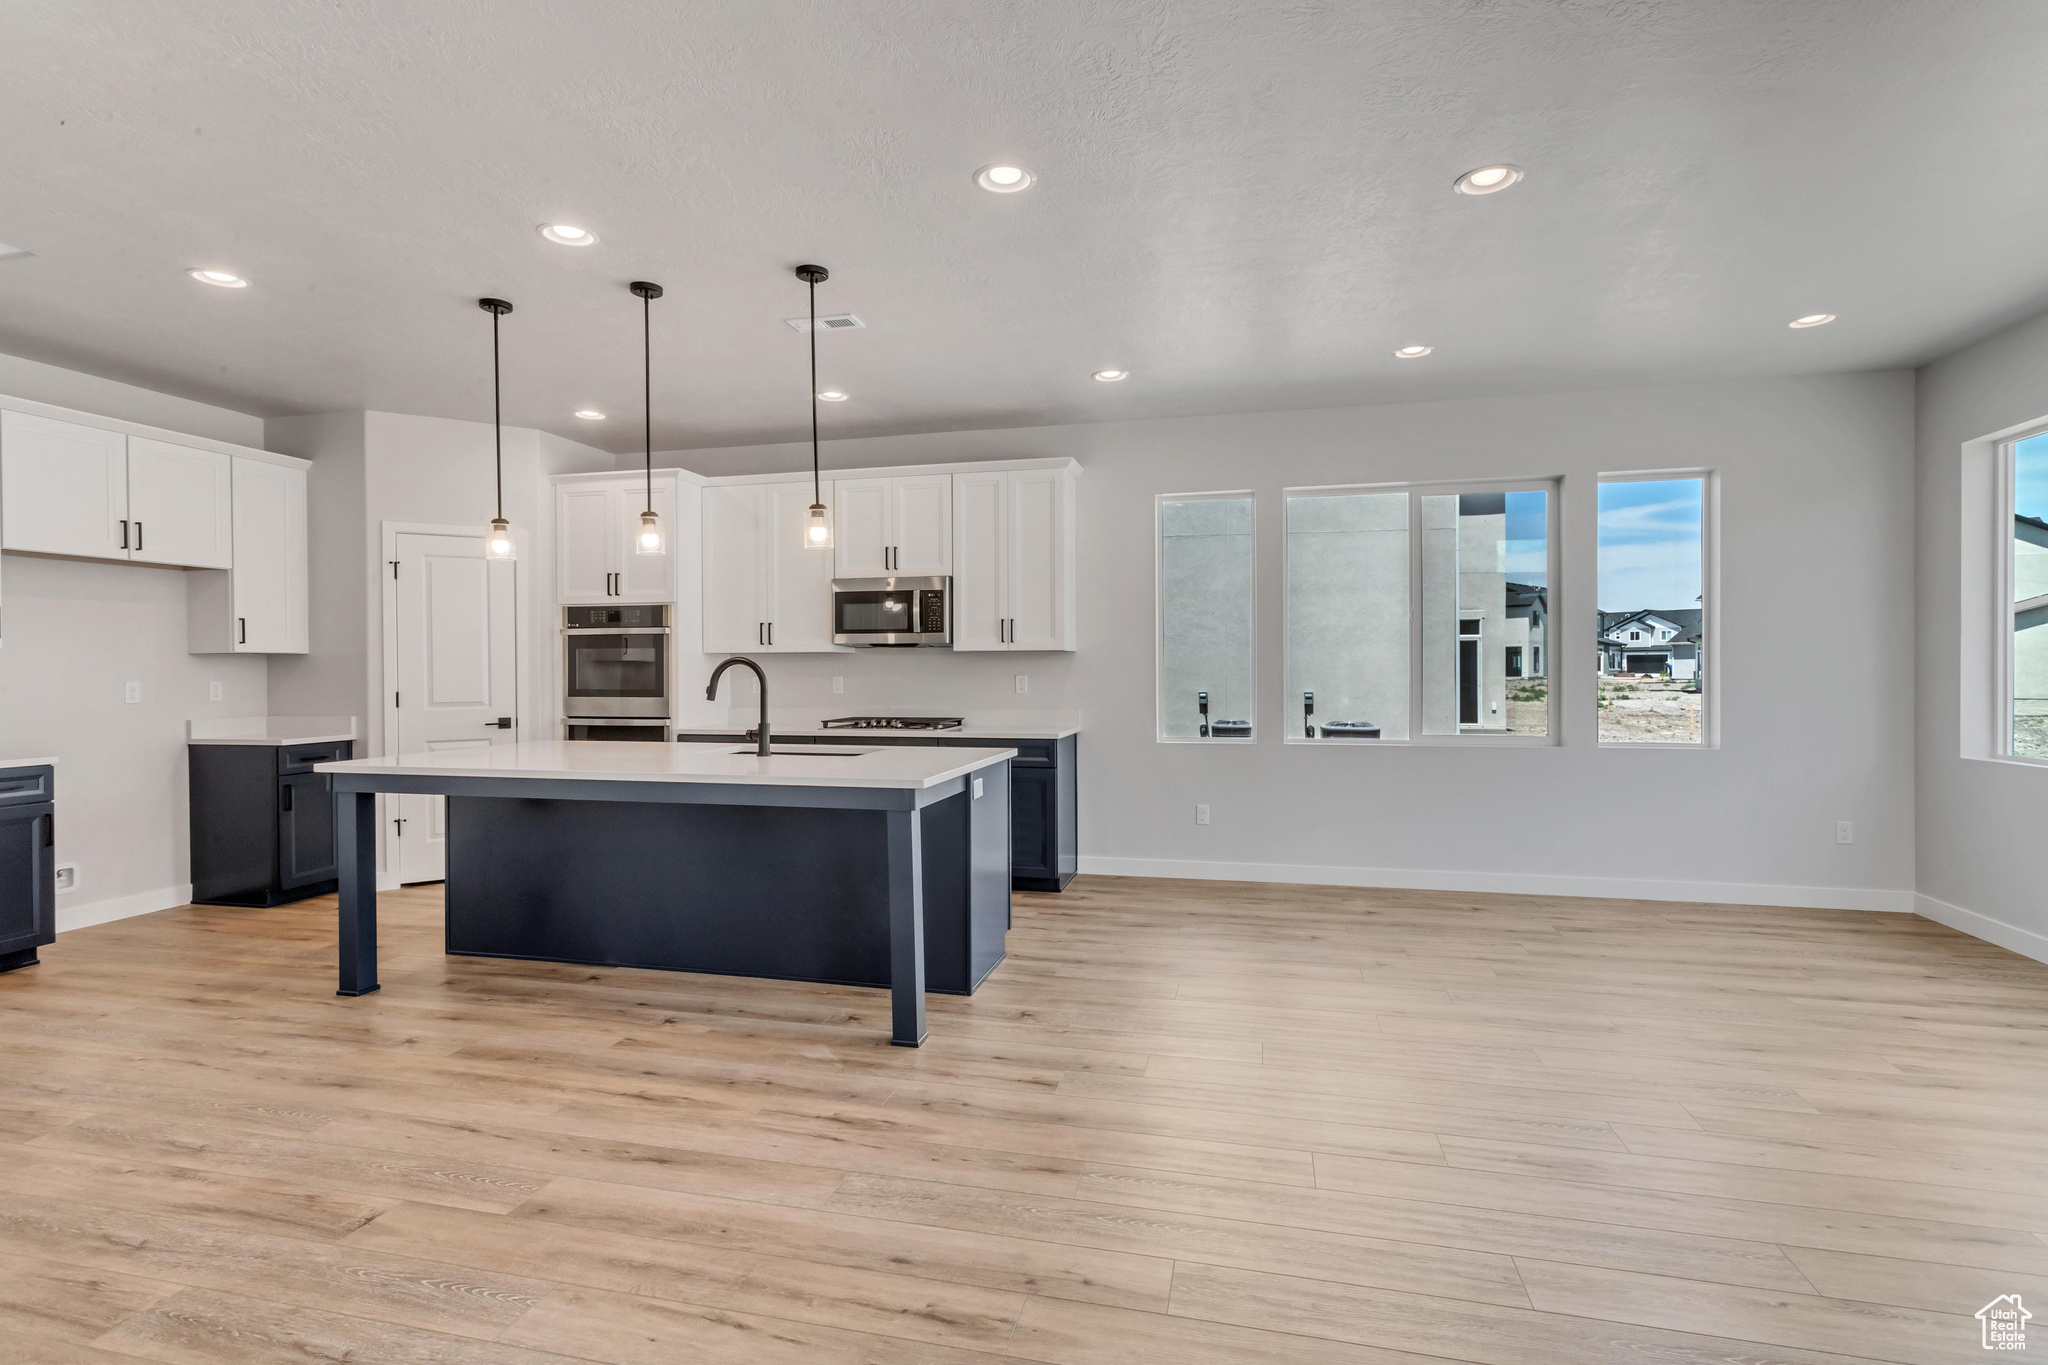 PHOTOS FROM A SIMILAR HOME. COLORS AND SELECTIONS WILL VARY.  Kitchen with light hardwood / wood-style floors, stainless steel appliances, and a kitchen island with sink